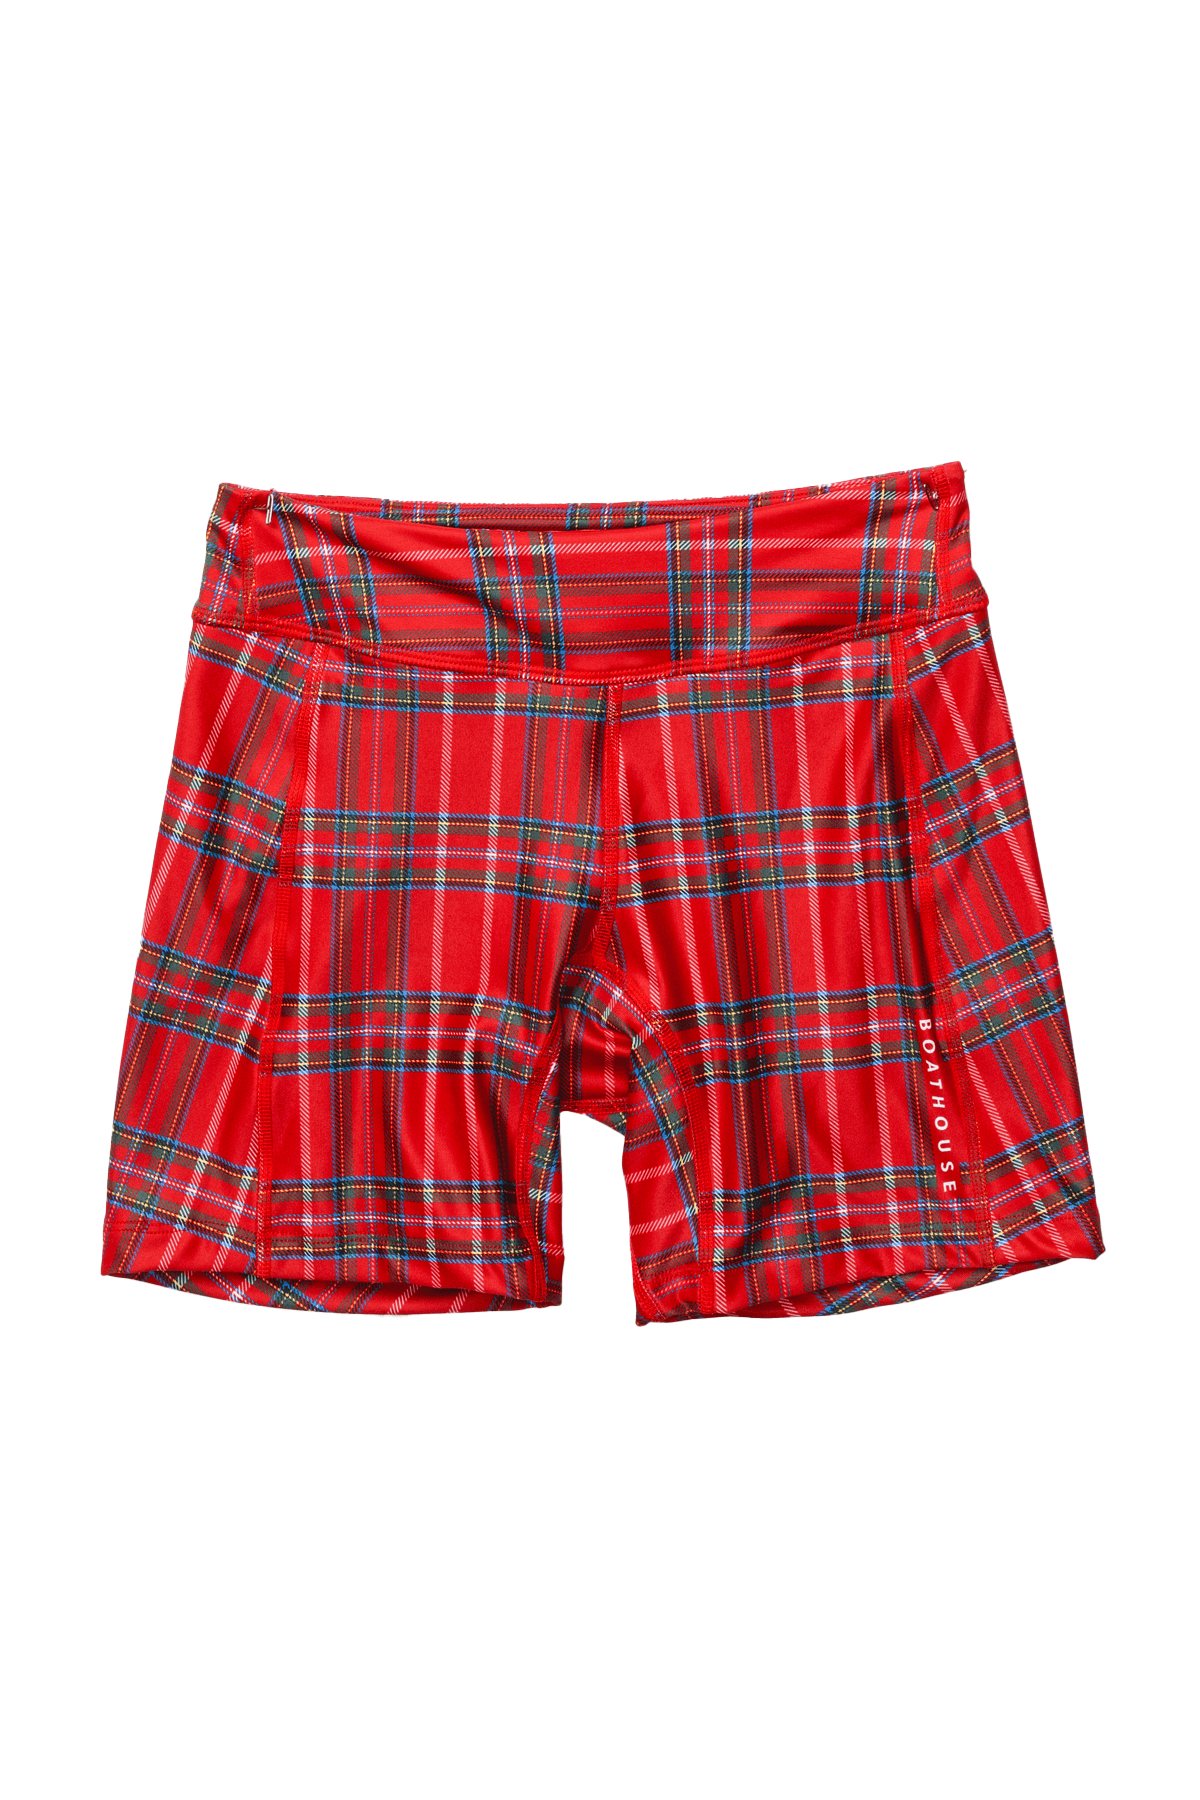 WOMEN'S PLAID ACCEL ROWING Red / X-Small